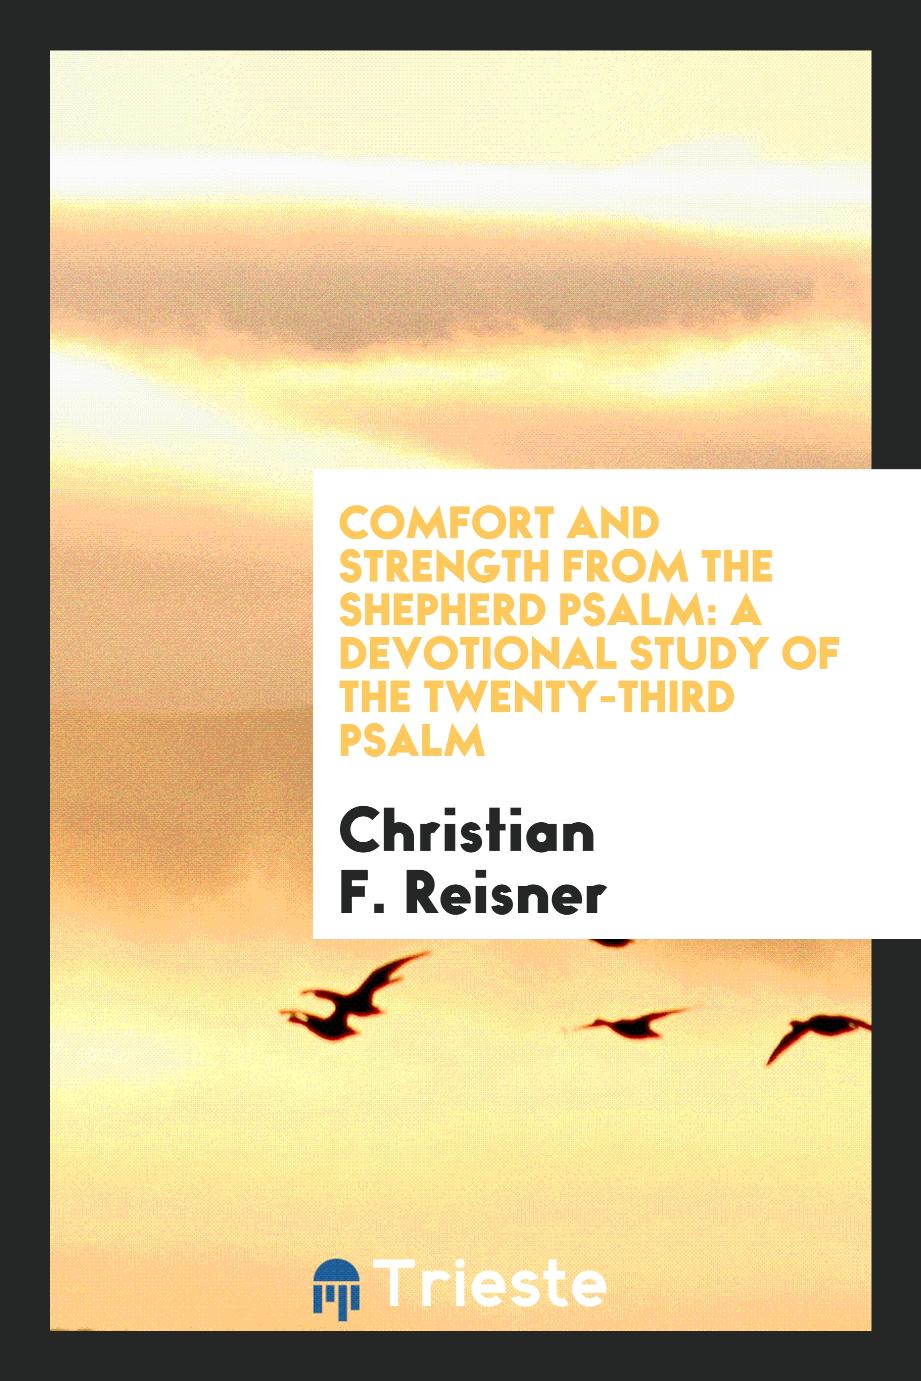 Comfort and Strength from the Shepherd Psalm: A Devotional Study of the Twenty-Third Psalm